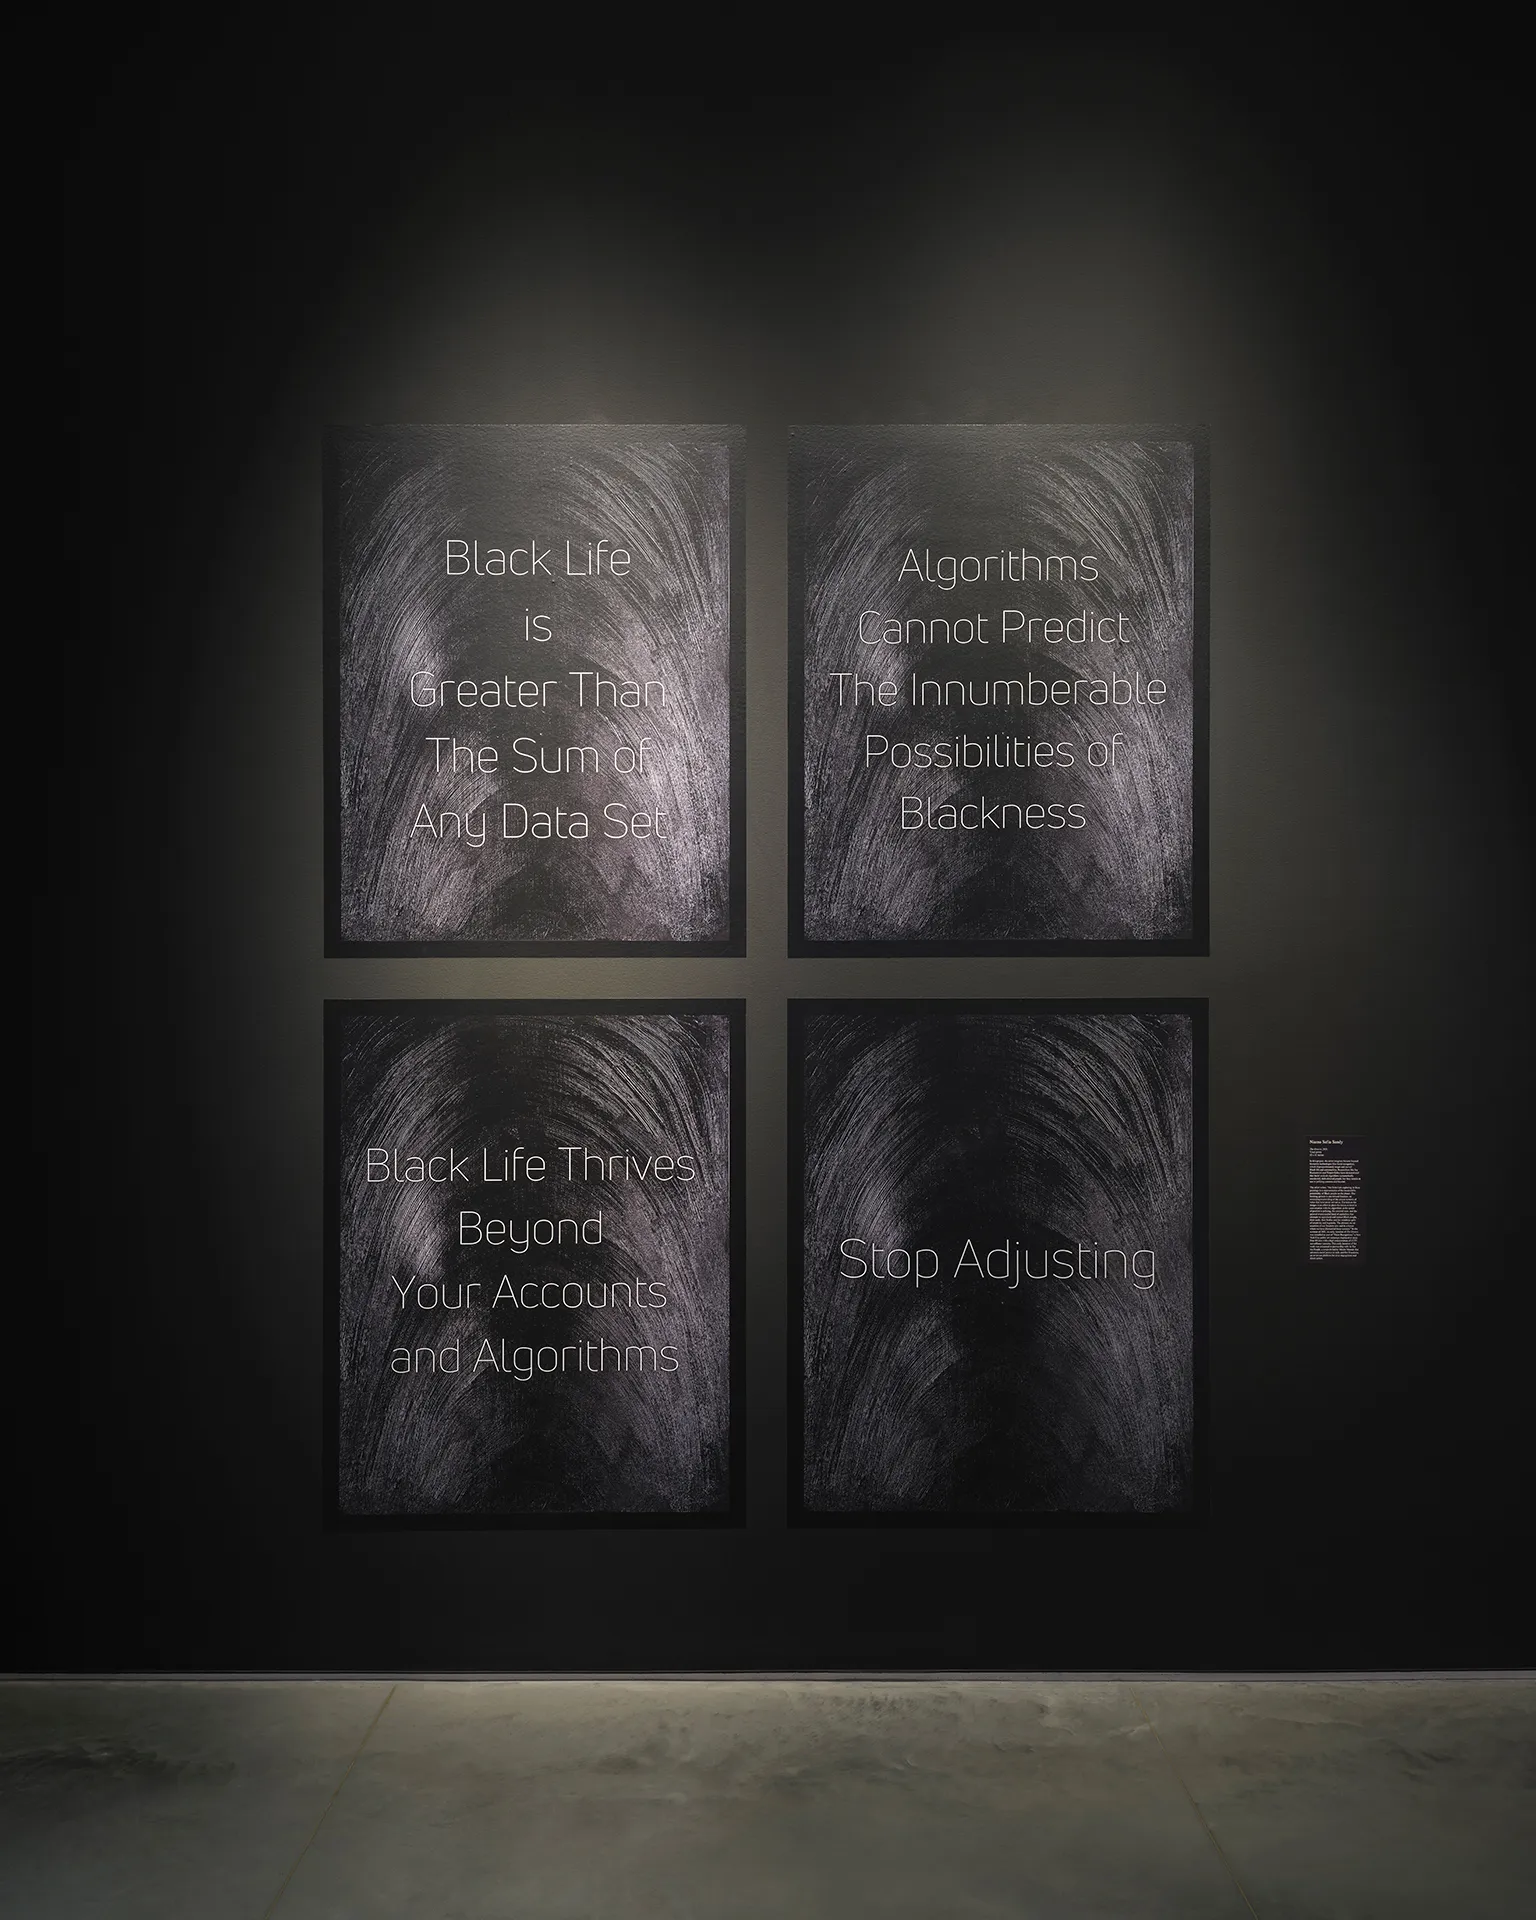 Four posters on painted black backgrounds with visible black brushstrokes. The posters read “Black Life is Greater Than The Sum of Any Data Set,” “Algorithms Cannot Predict The Innumerable Possibilities of Blackness,” “Black Life Thrives Beyond Your Accounts and Algorithms,” and “Stop Adjusting.”